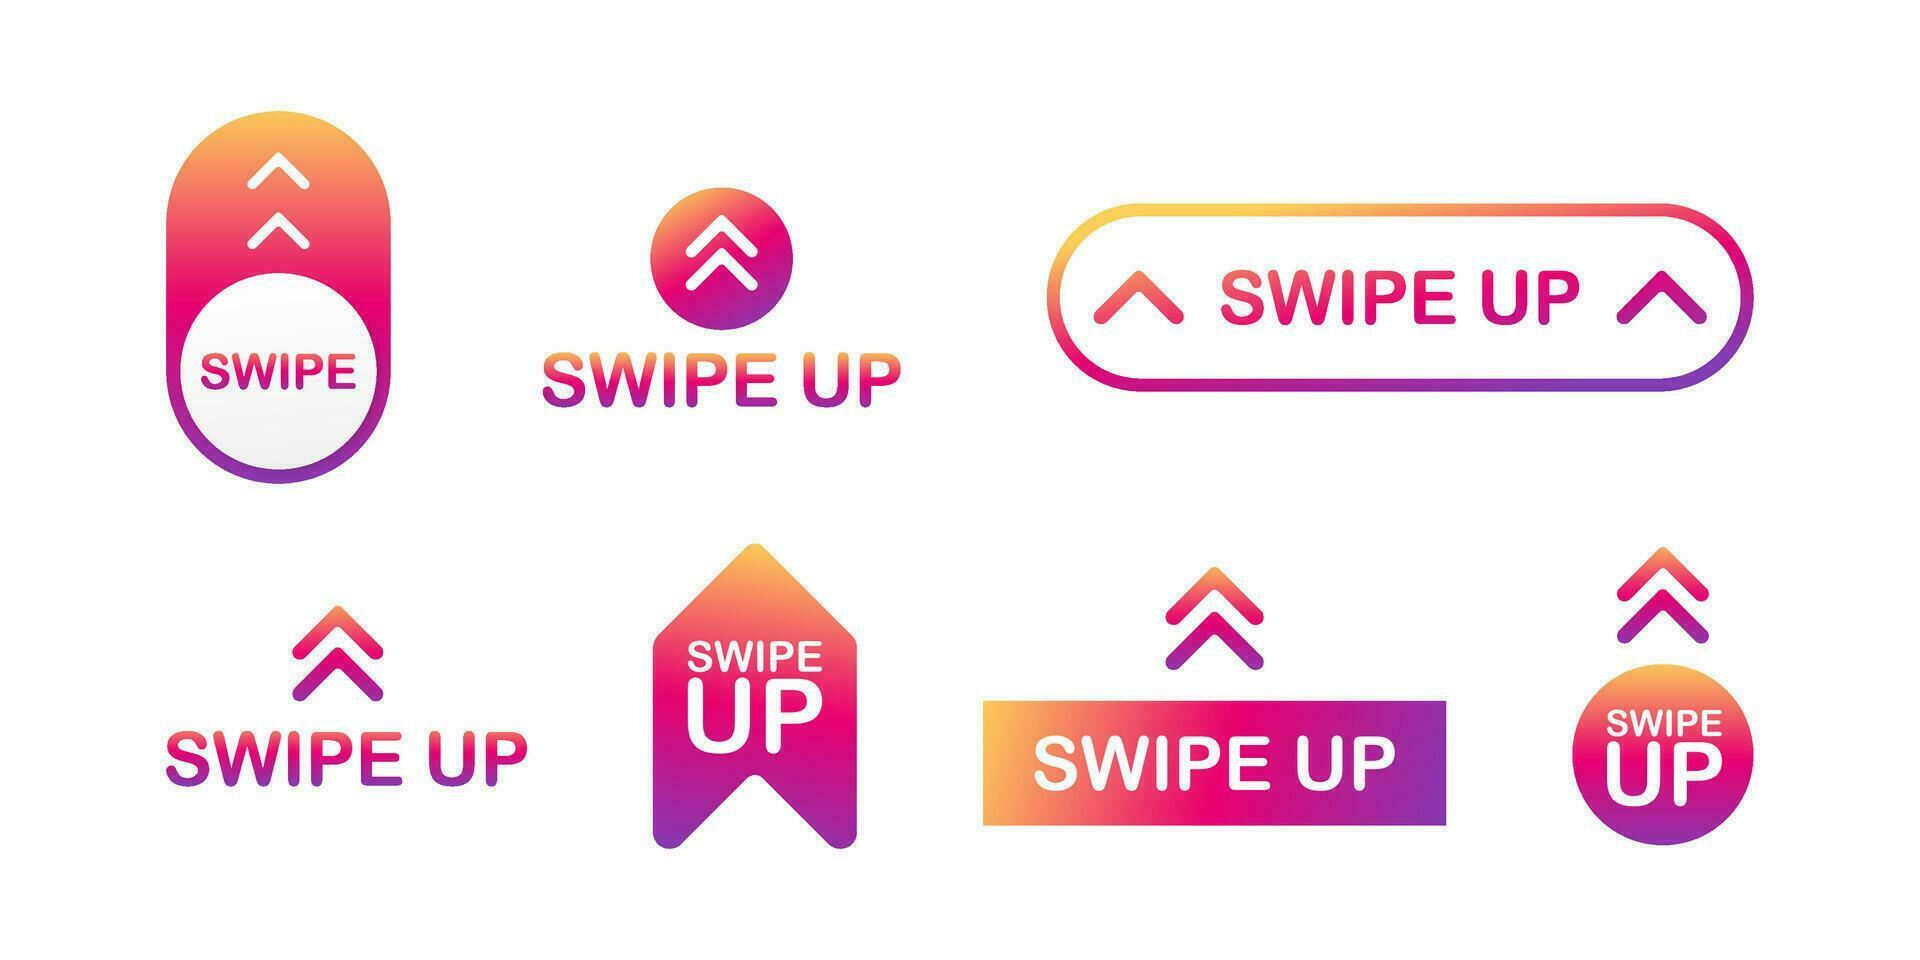 Swipe up icon set isolated on background for stories design. Vector stock illustration.